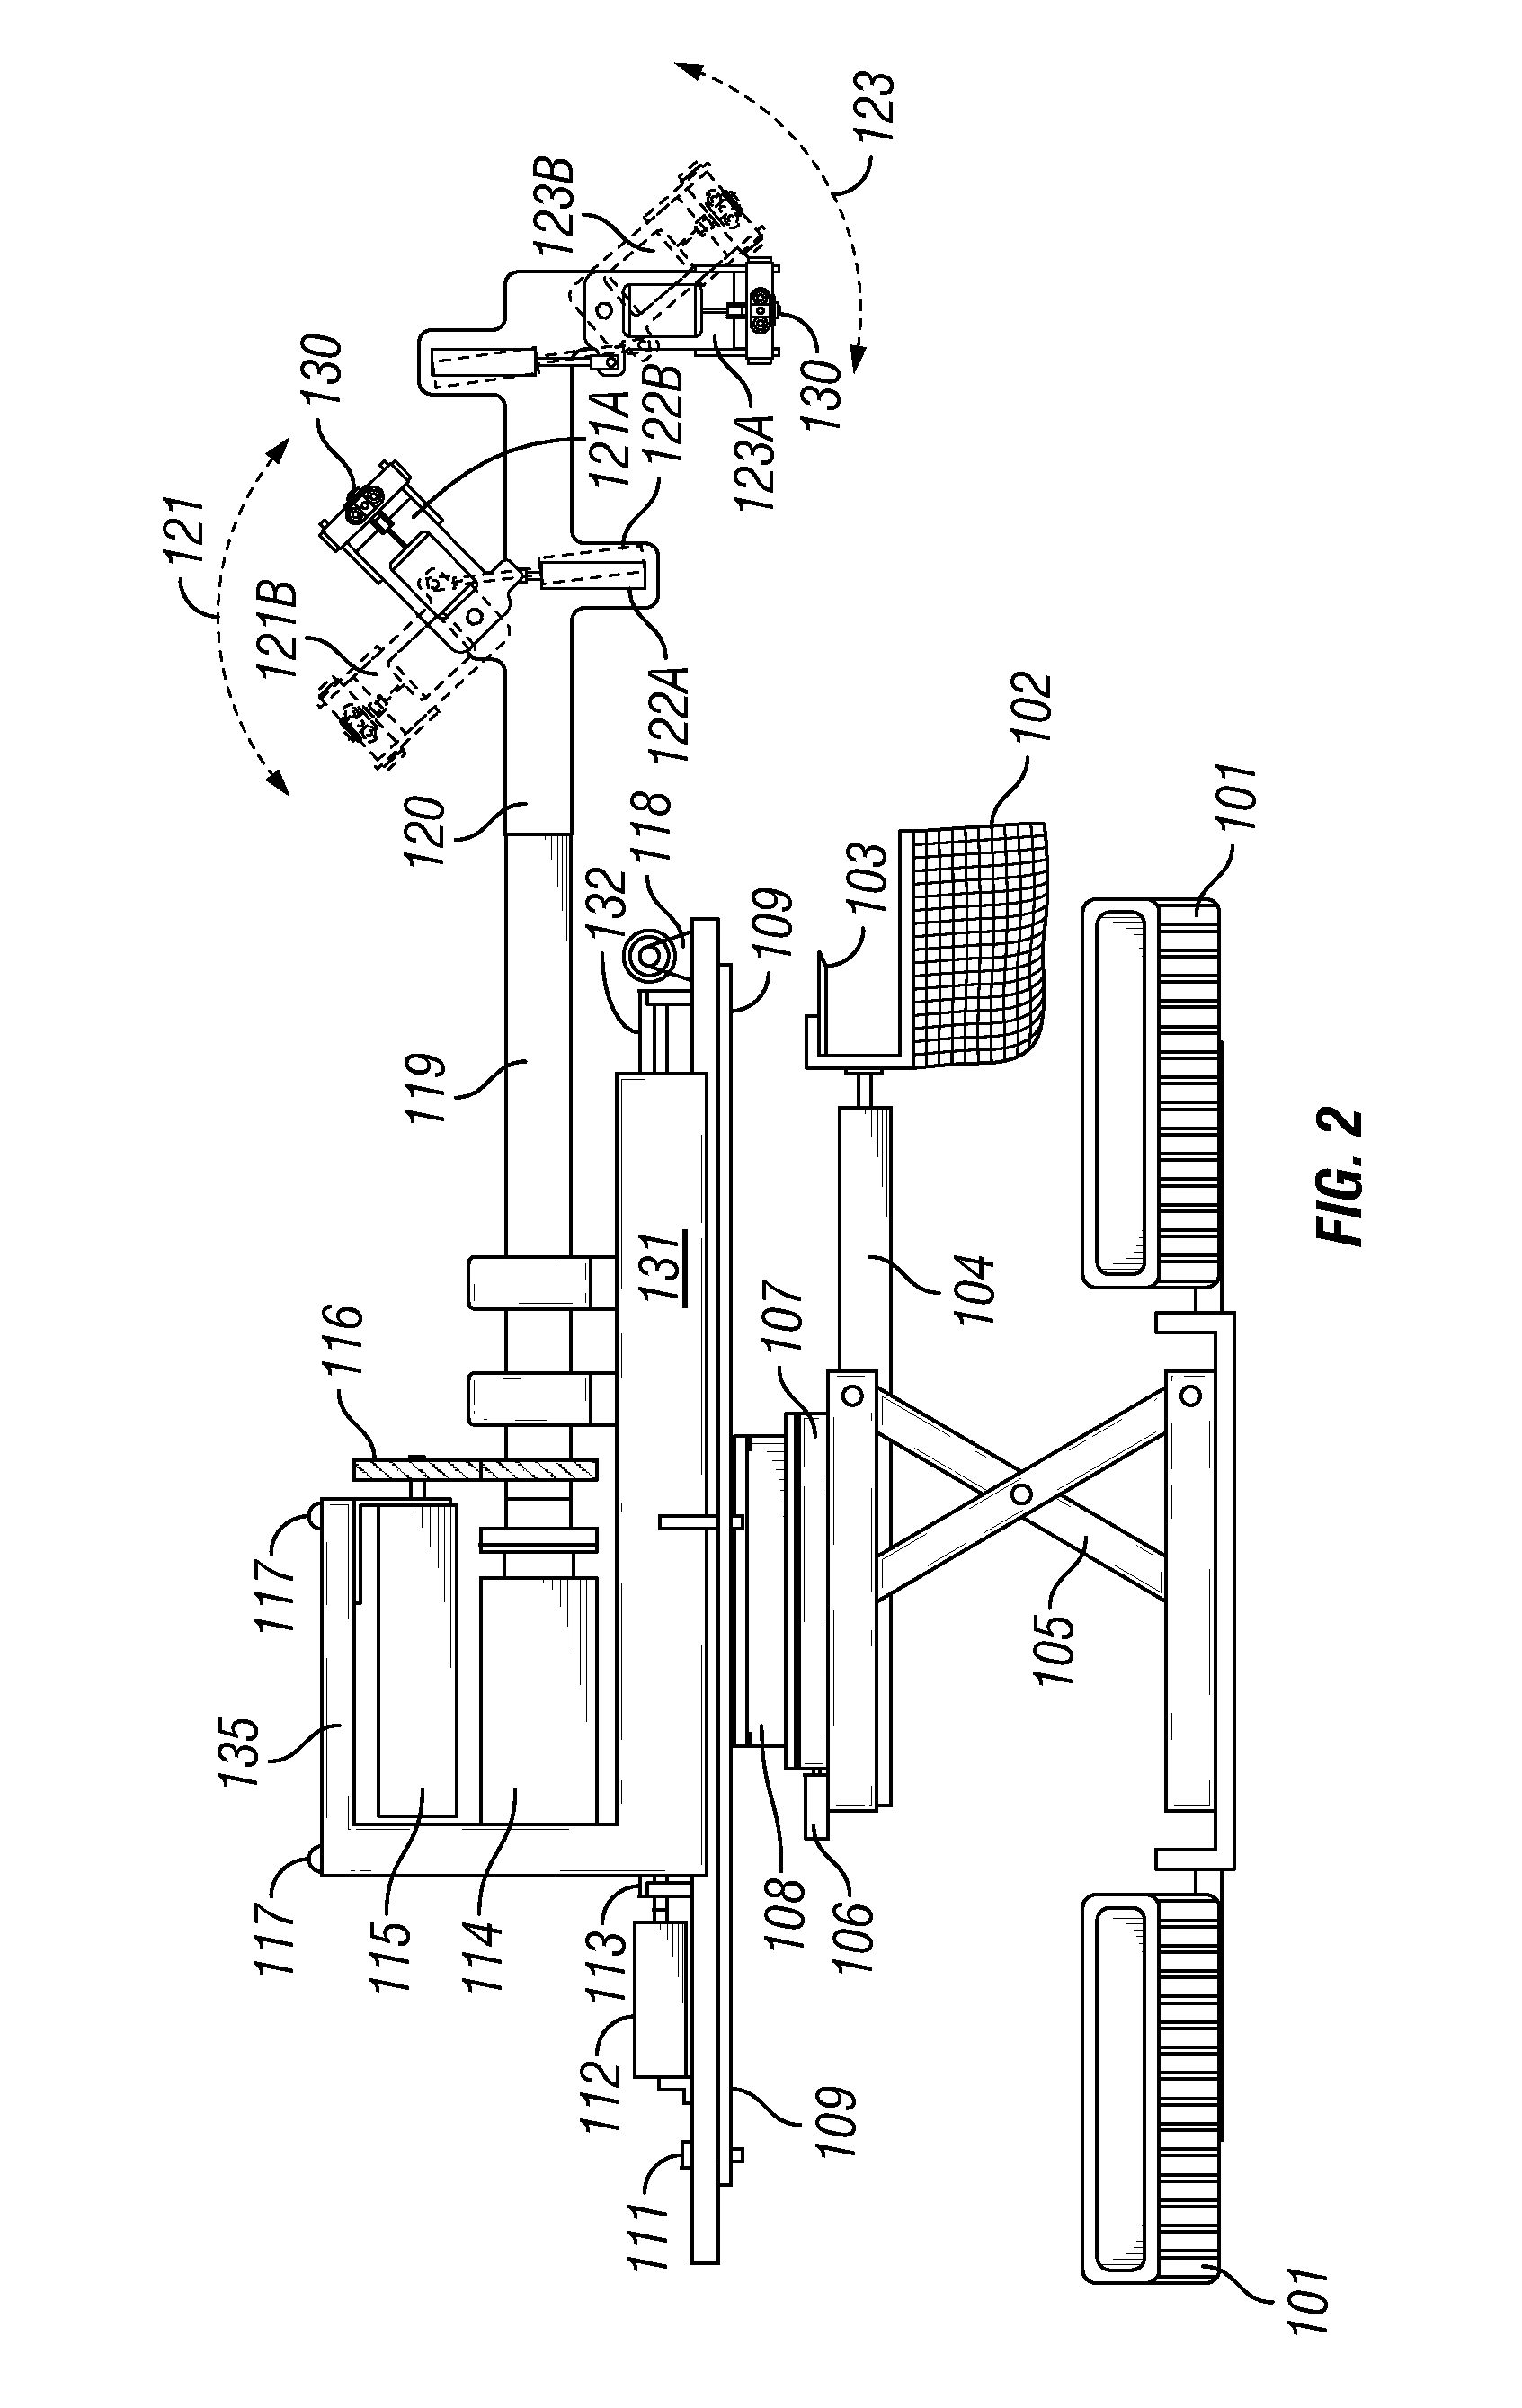 Apparatus and method for lining large diameter pipe with an environmentally compatible impervious membrane